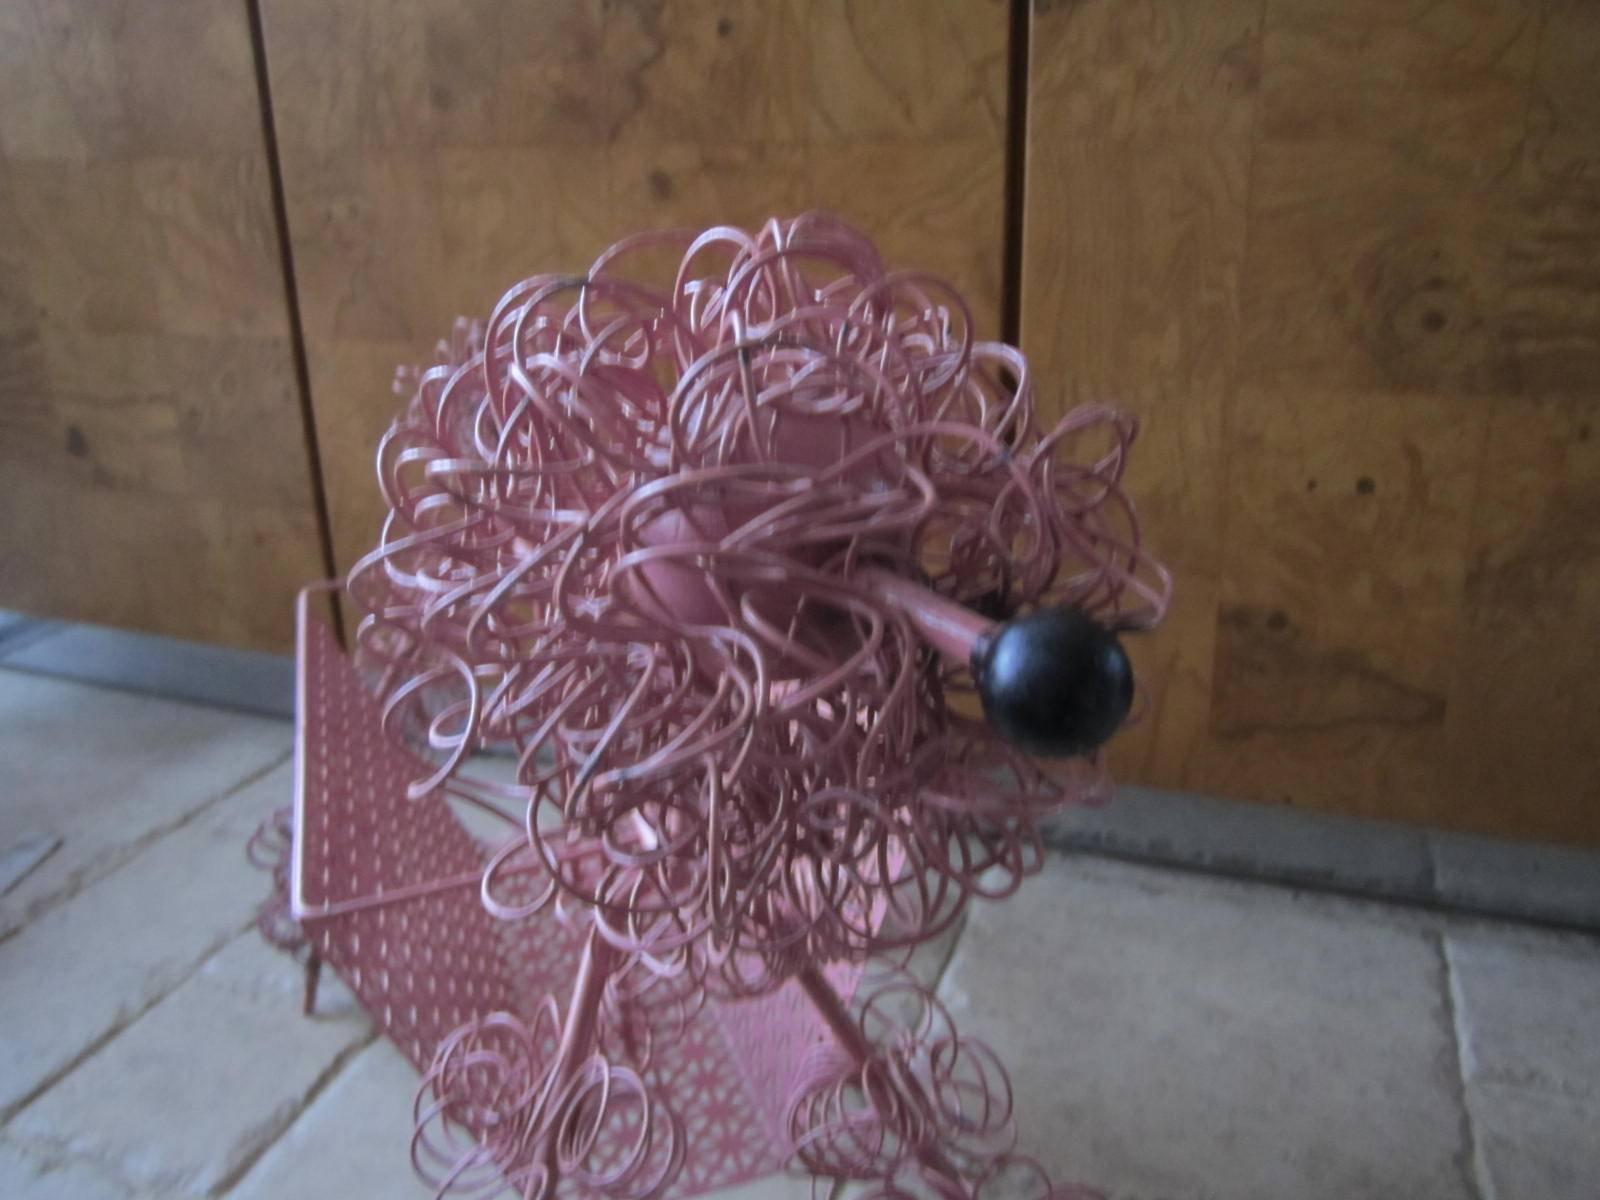 American Fun Whimsical Weinberg 1950s Pink Poodle Magazine Rack For Sale